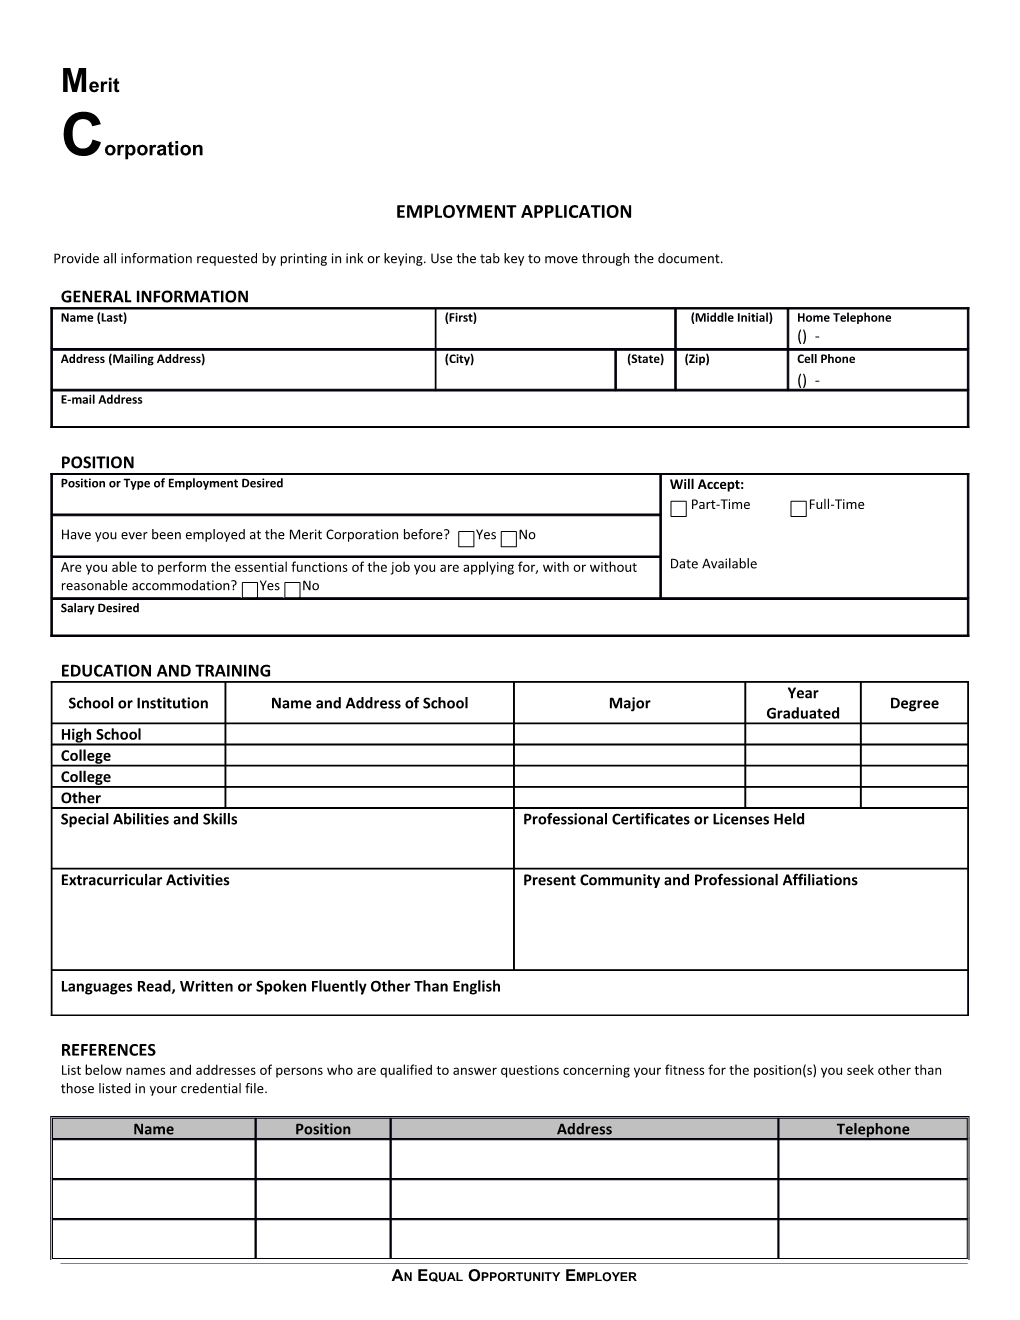 Application for Employment s62